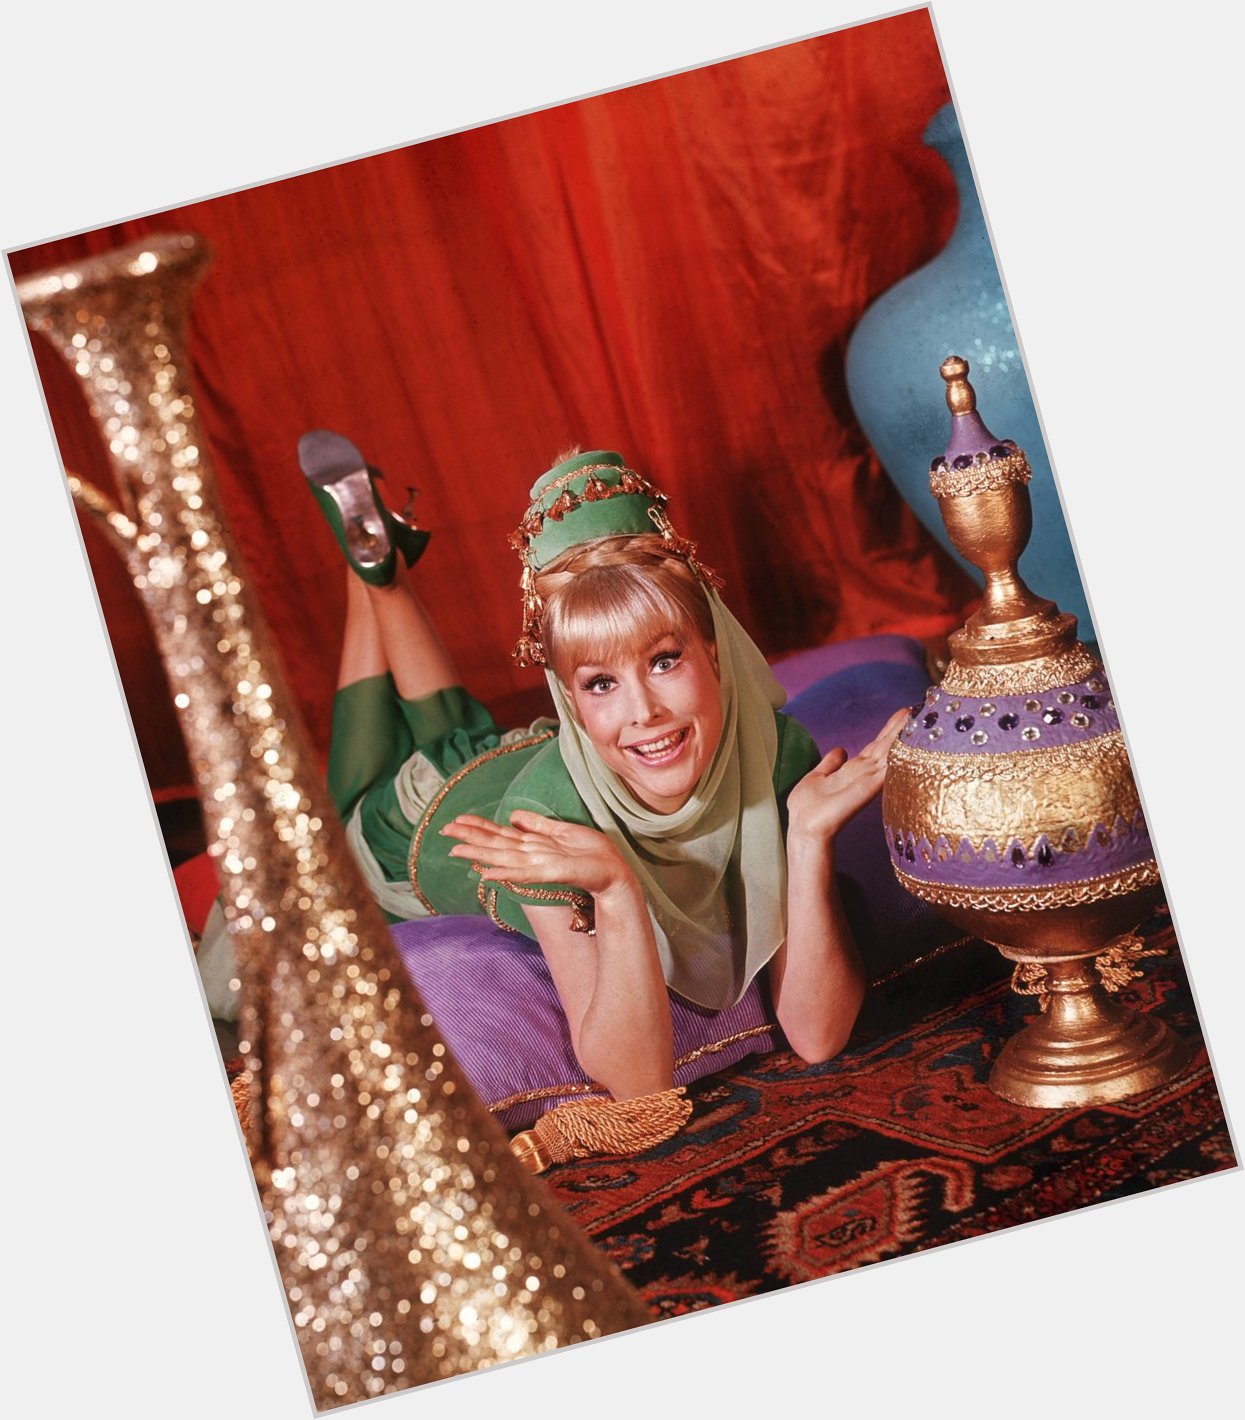  You share a birthday with Barbara Eden! happy birthday from us! 